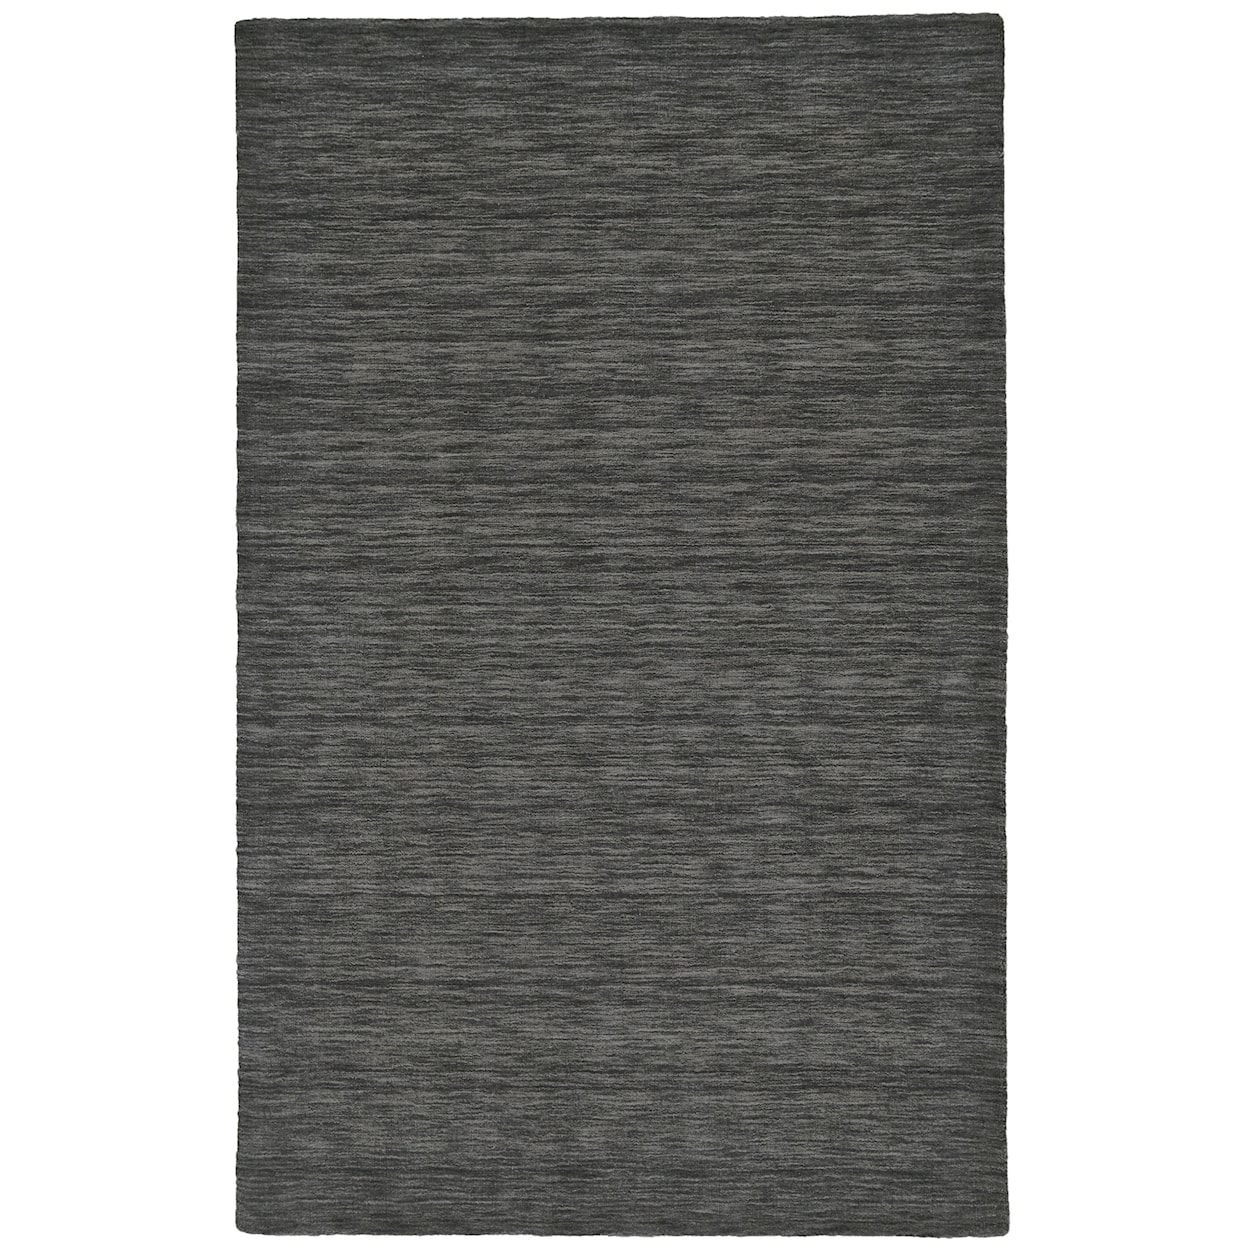 Feizy Rugs Luna Charcoal 5' x 8' Area Rug